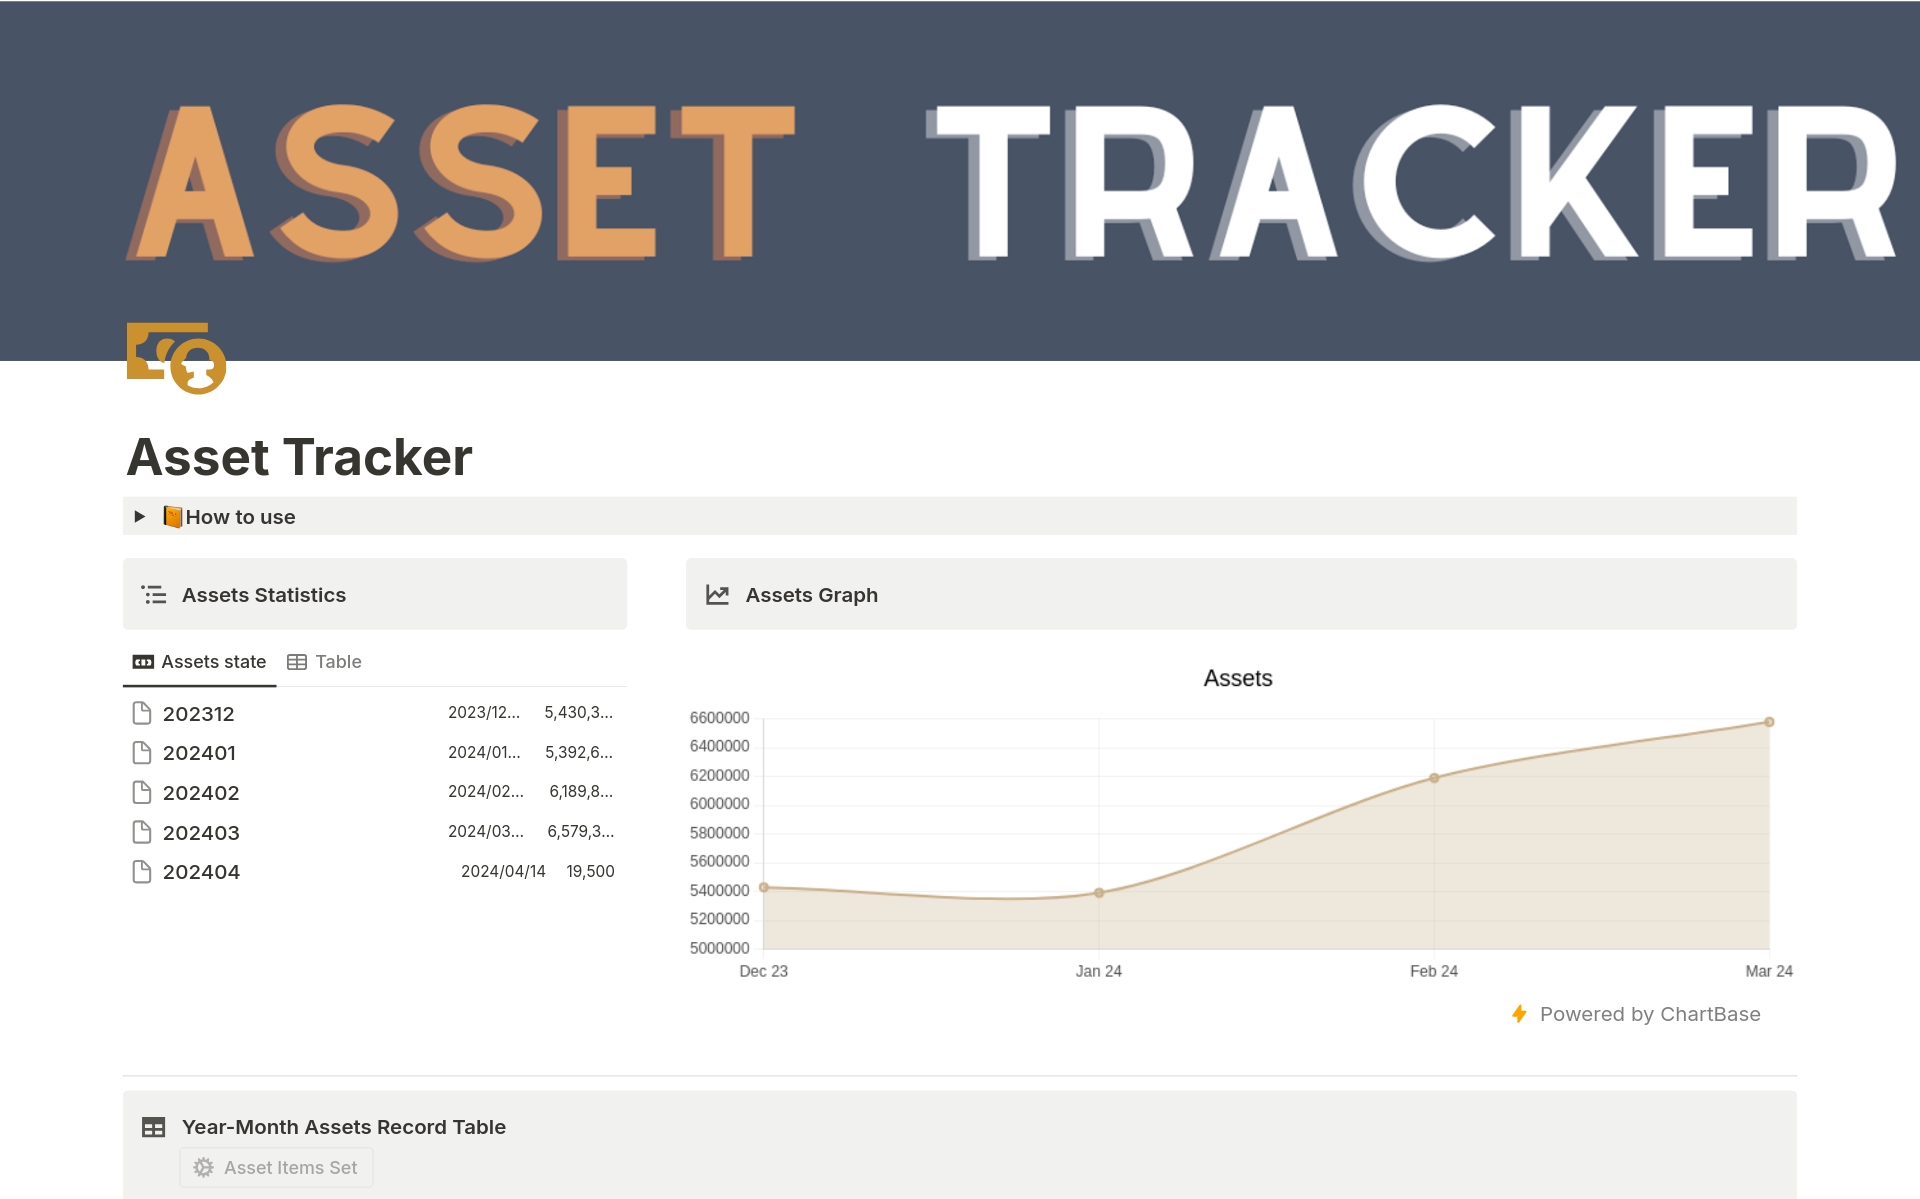 What includes
1. Current month assets summary
2. Asset Chart
3. Quick button
4. Asset Details
Click the link for more information. Give it a try!